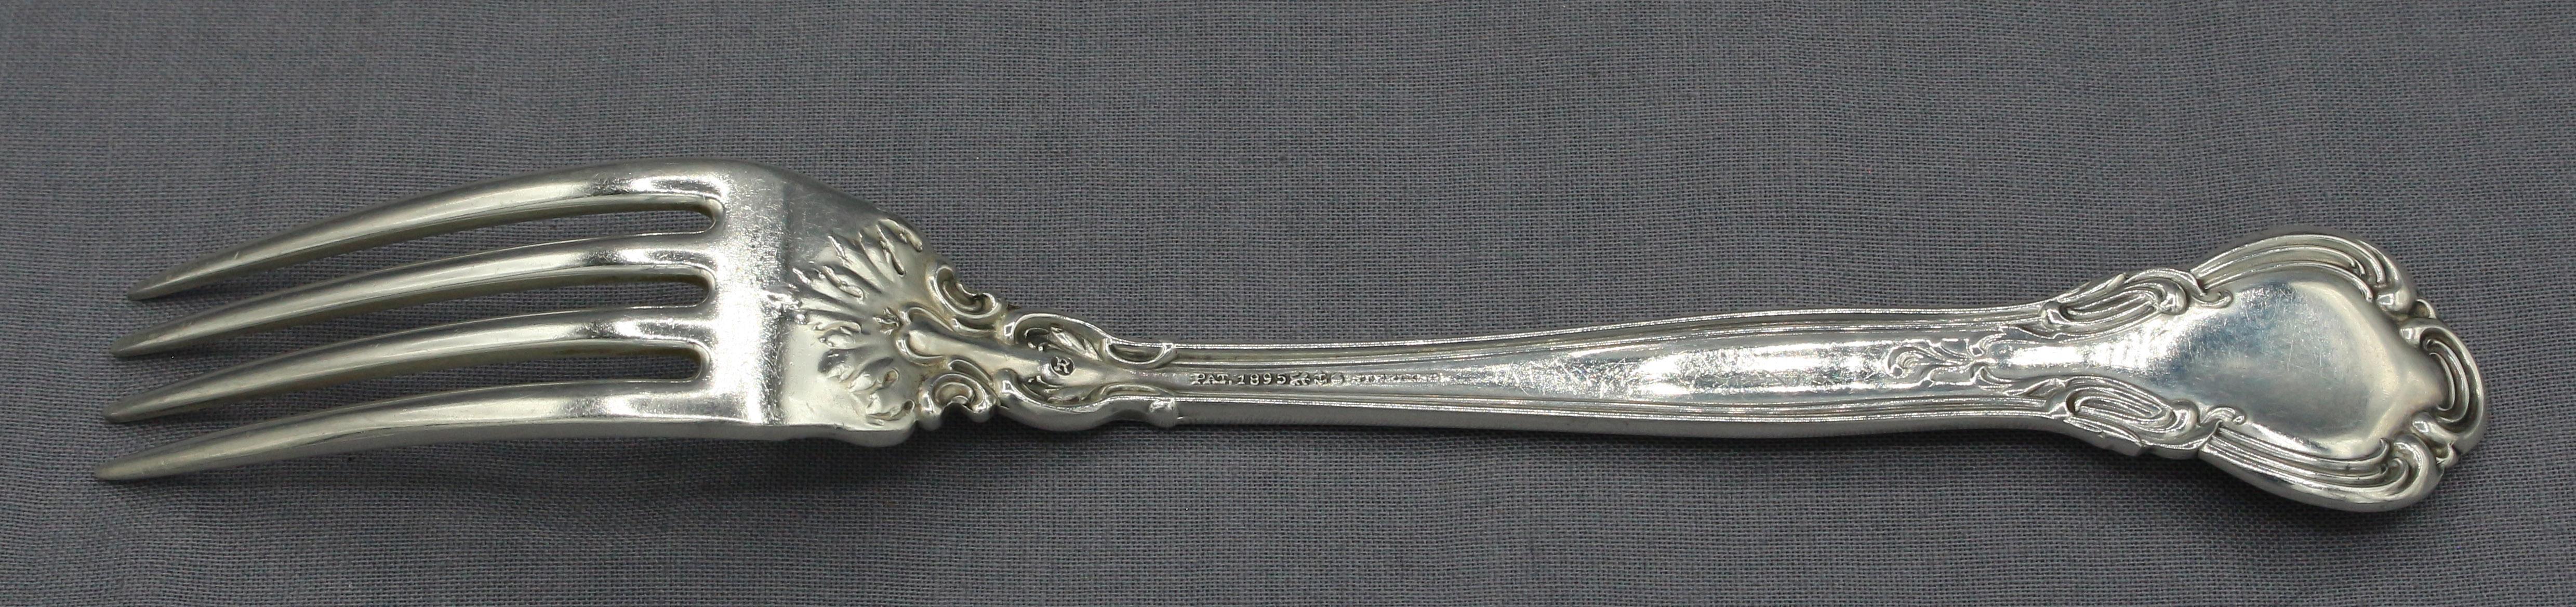 Rococo Late 19th Century Assembled Set of 7 Sterling Silver Luncheon Forks by Gorham